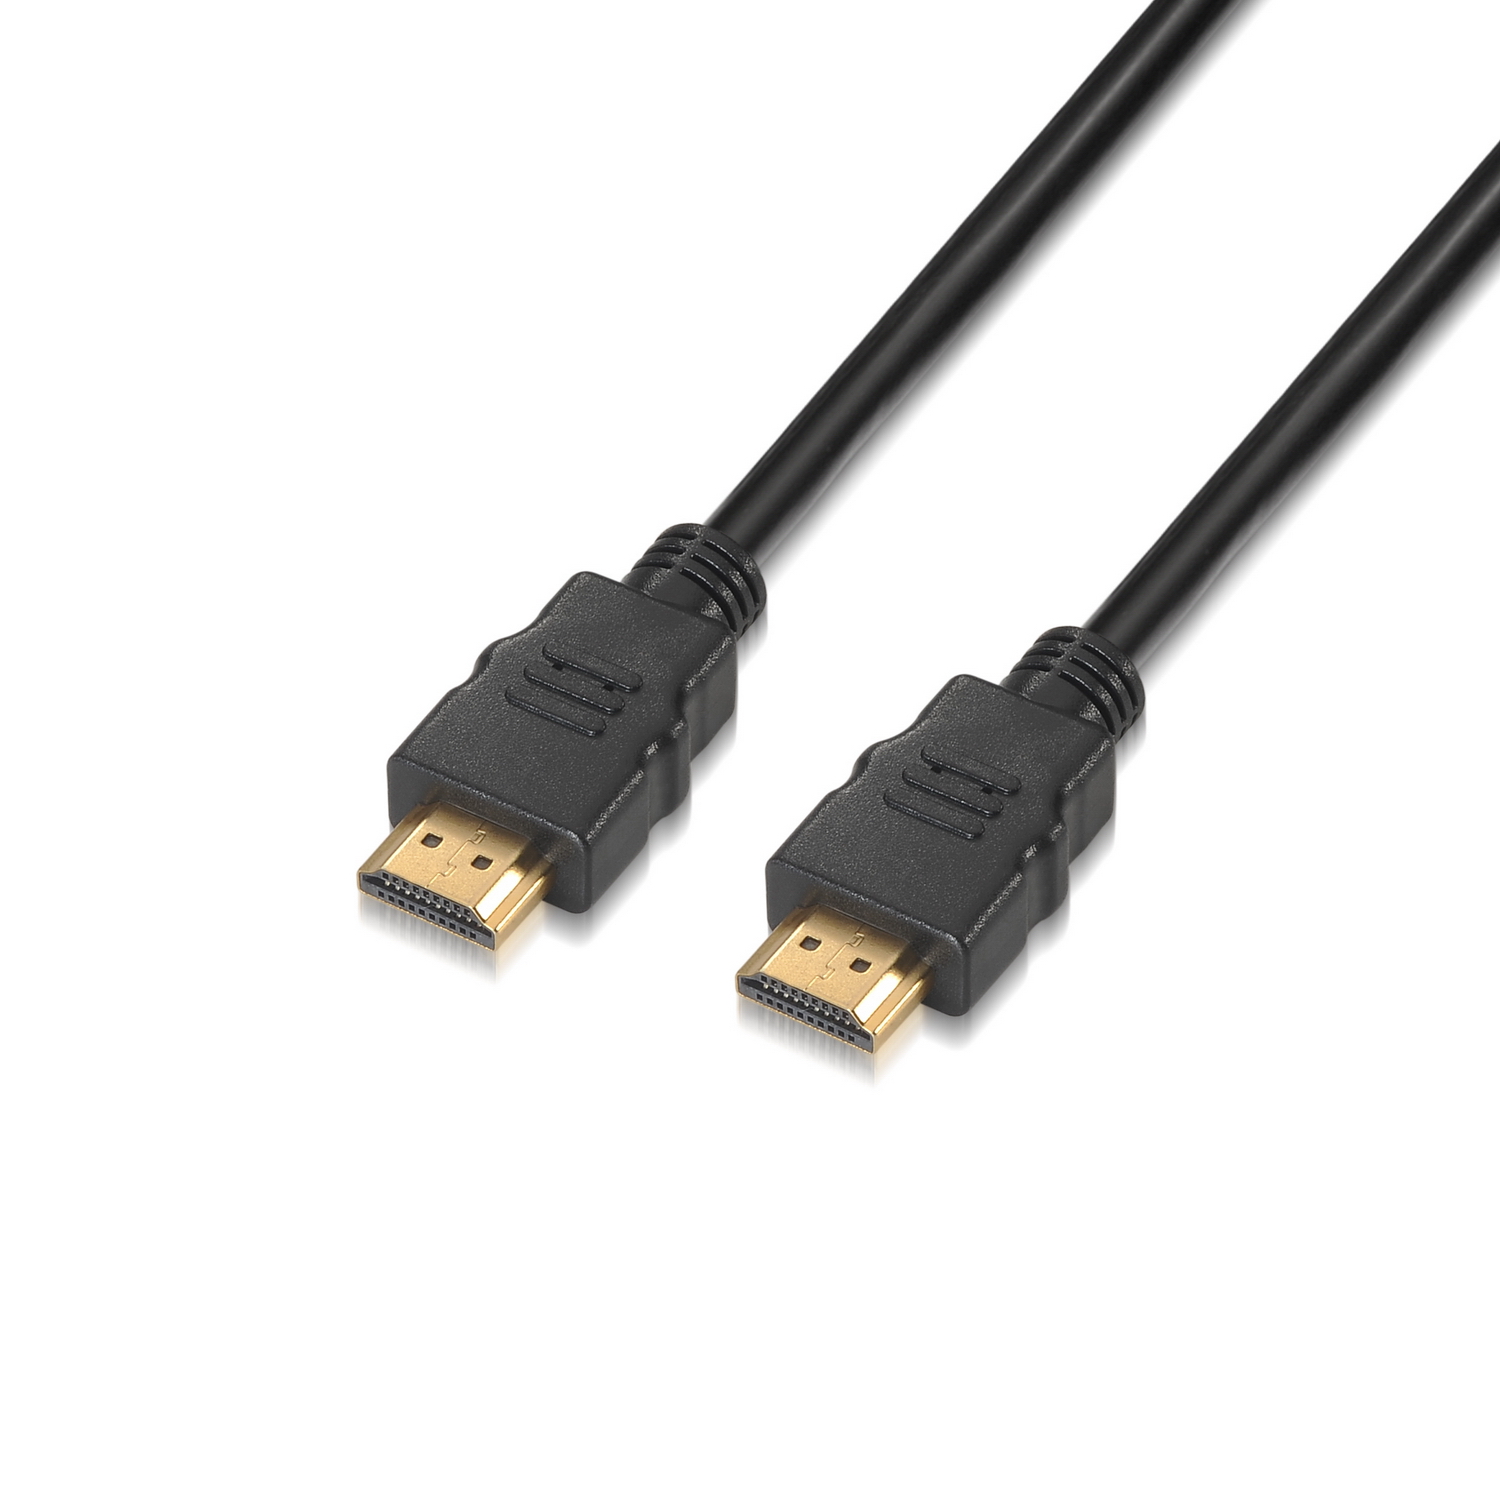 CABLE HDMI M1000 UHD 4K HDR 22.5GBPS 3M : ascendeo grossiste Câbles HDMI